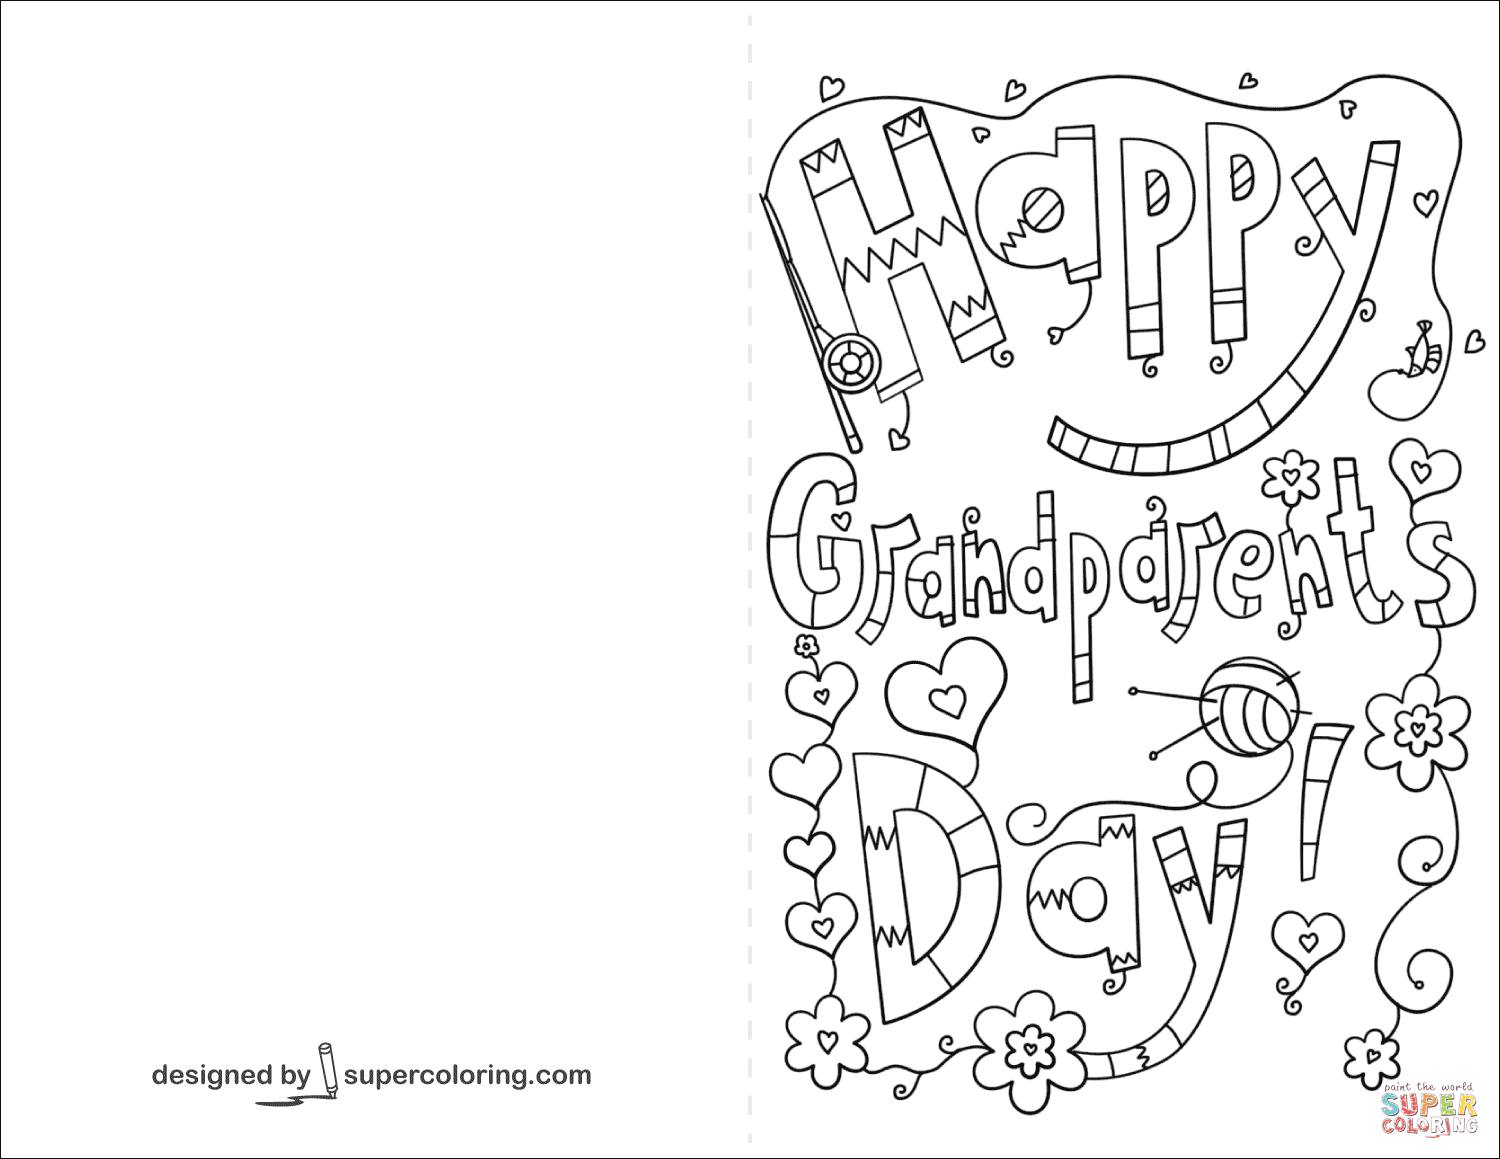 Grandparent&amp;#039;s Day Coloring Pages | Free Coloring Pages - Grandparents Day Cards Printable Free